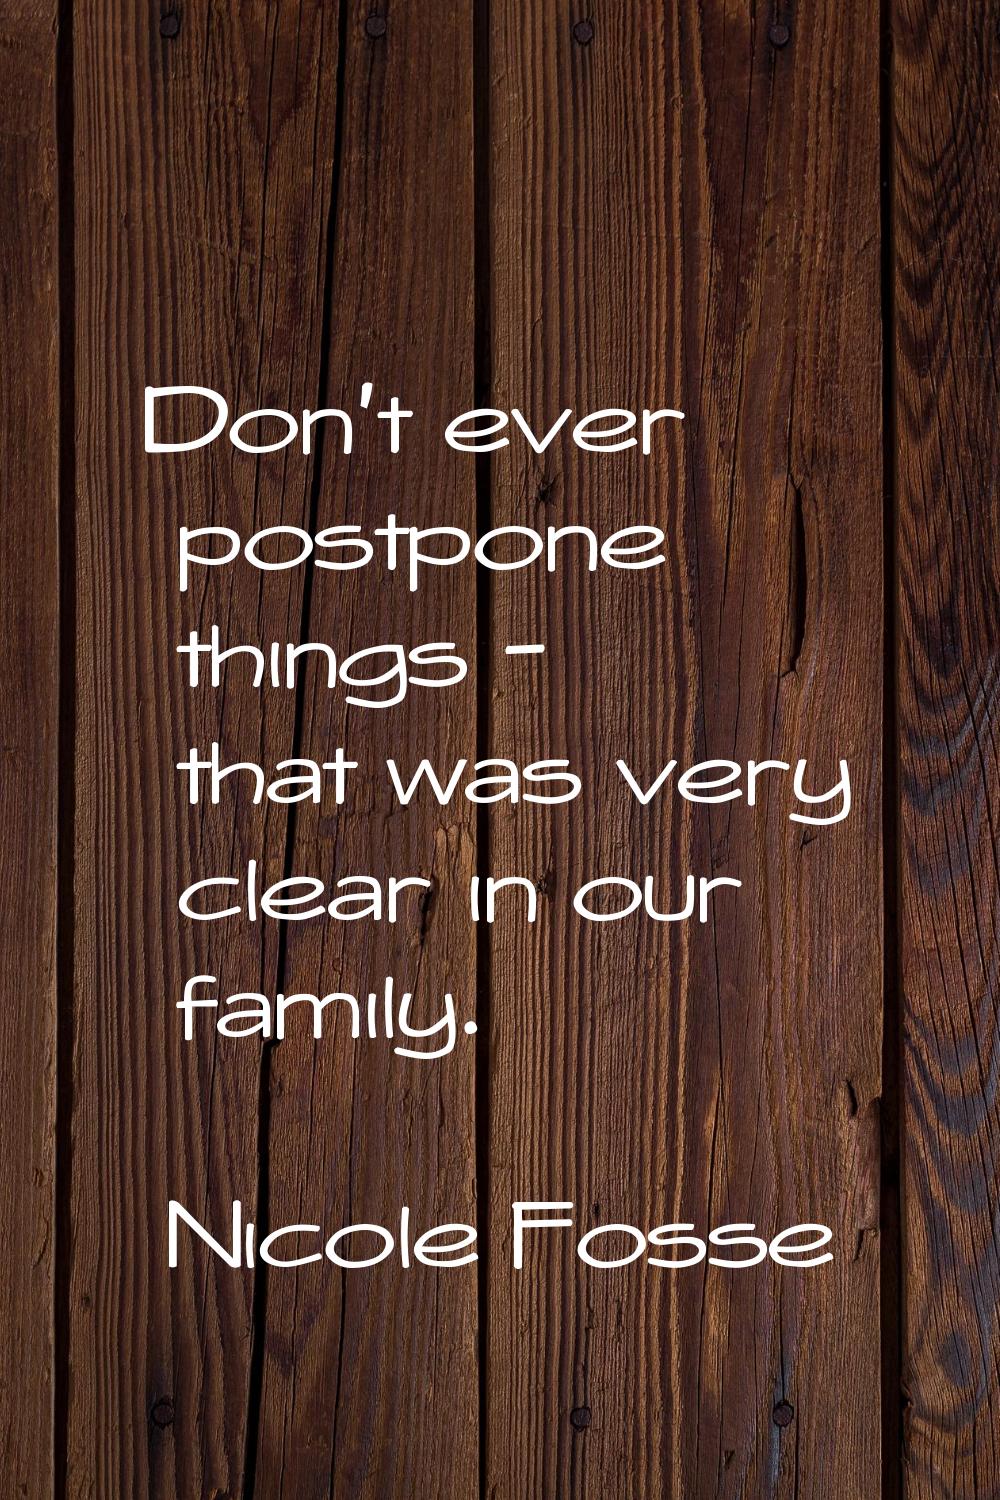 Don’t ever postpone things - that was very clear in our family.